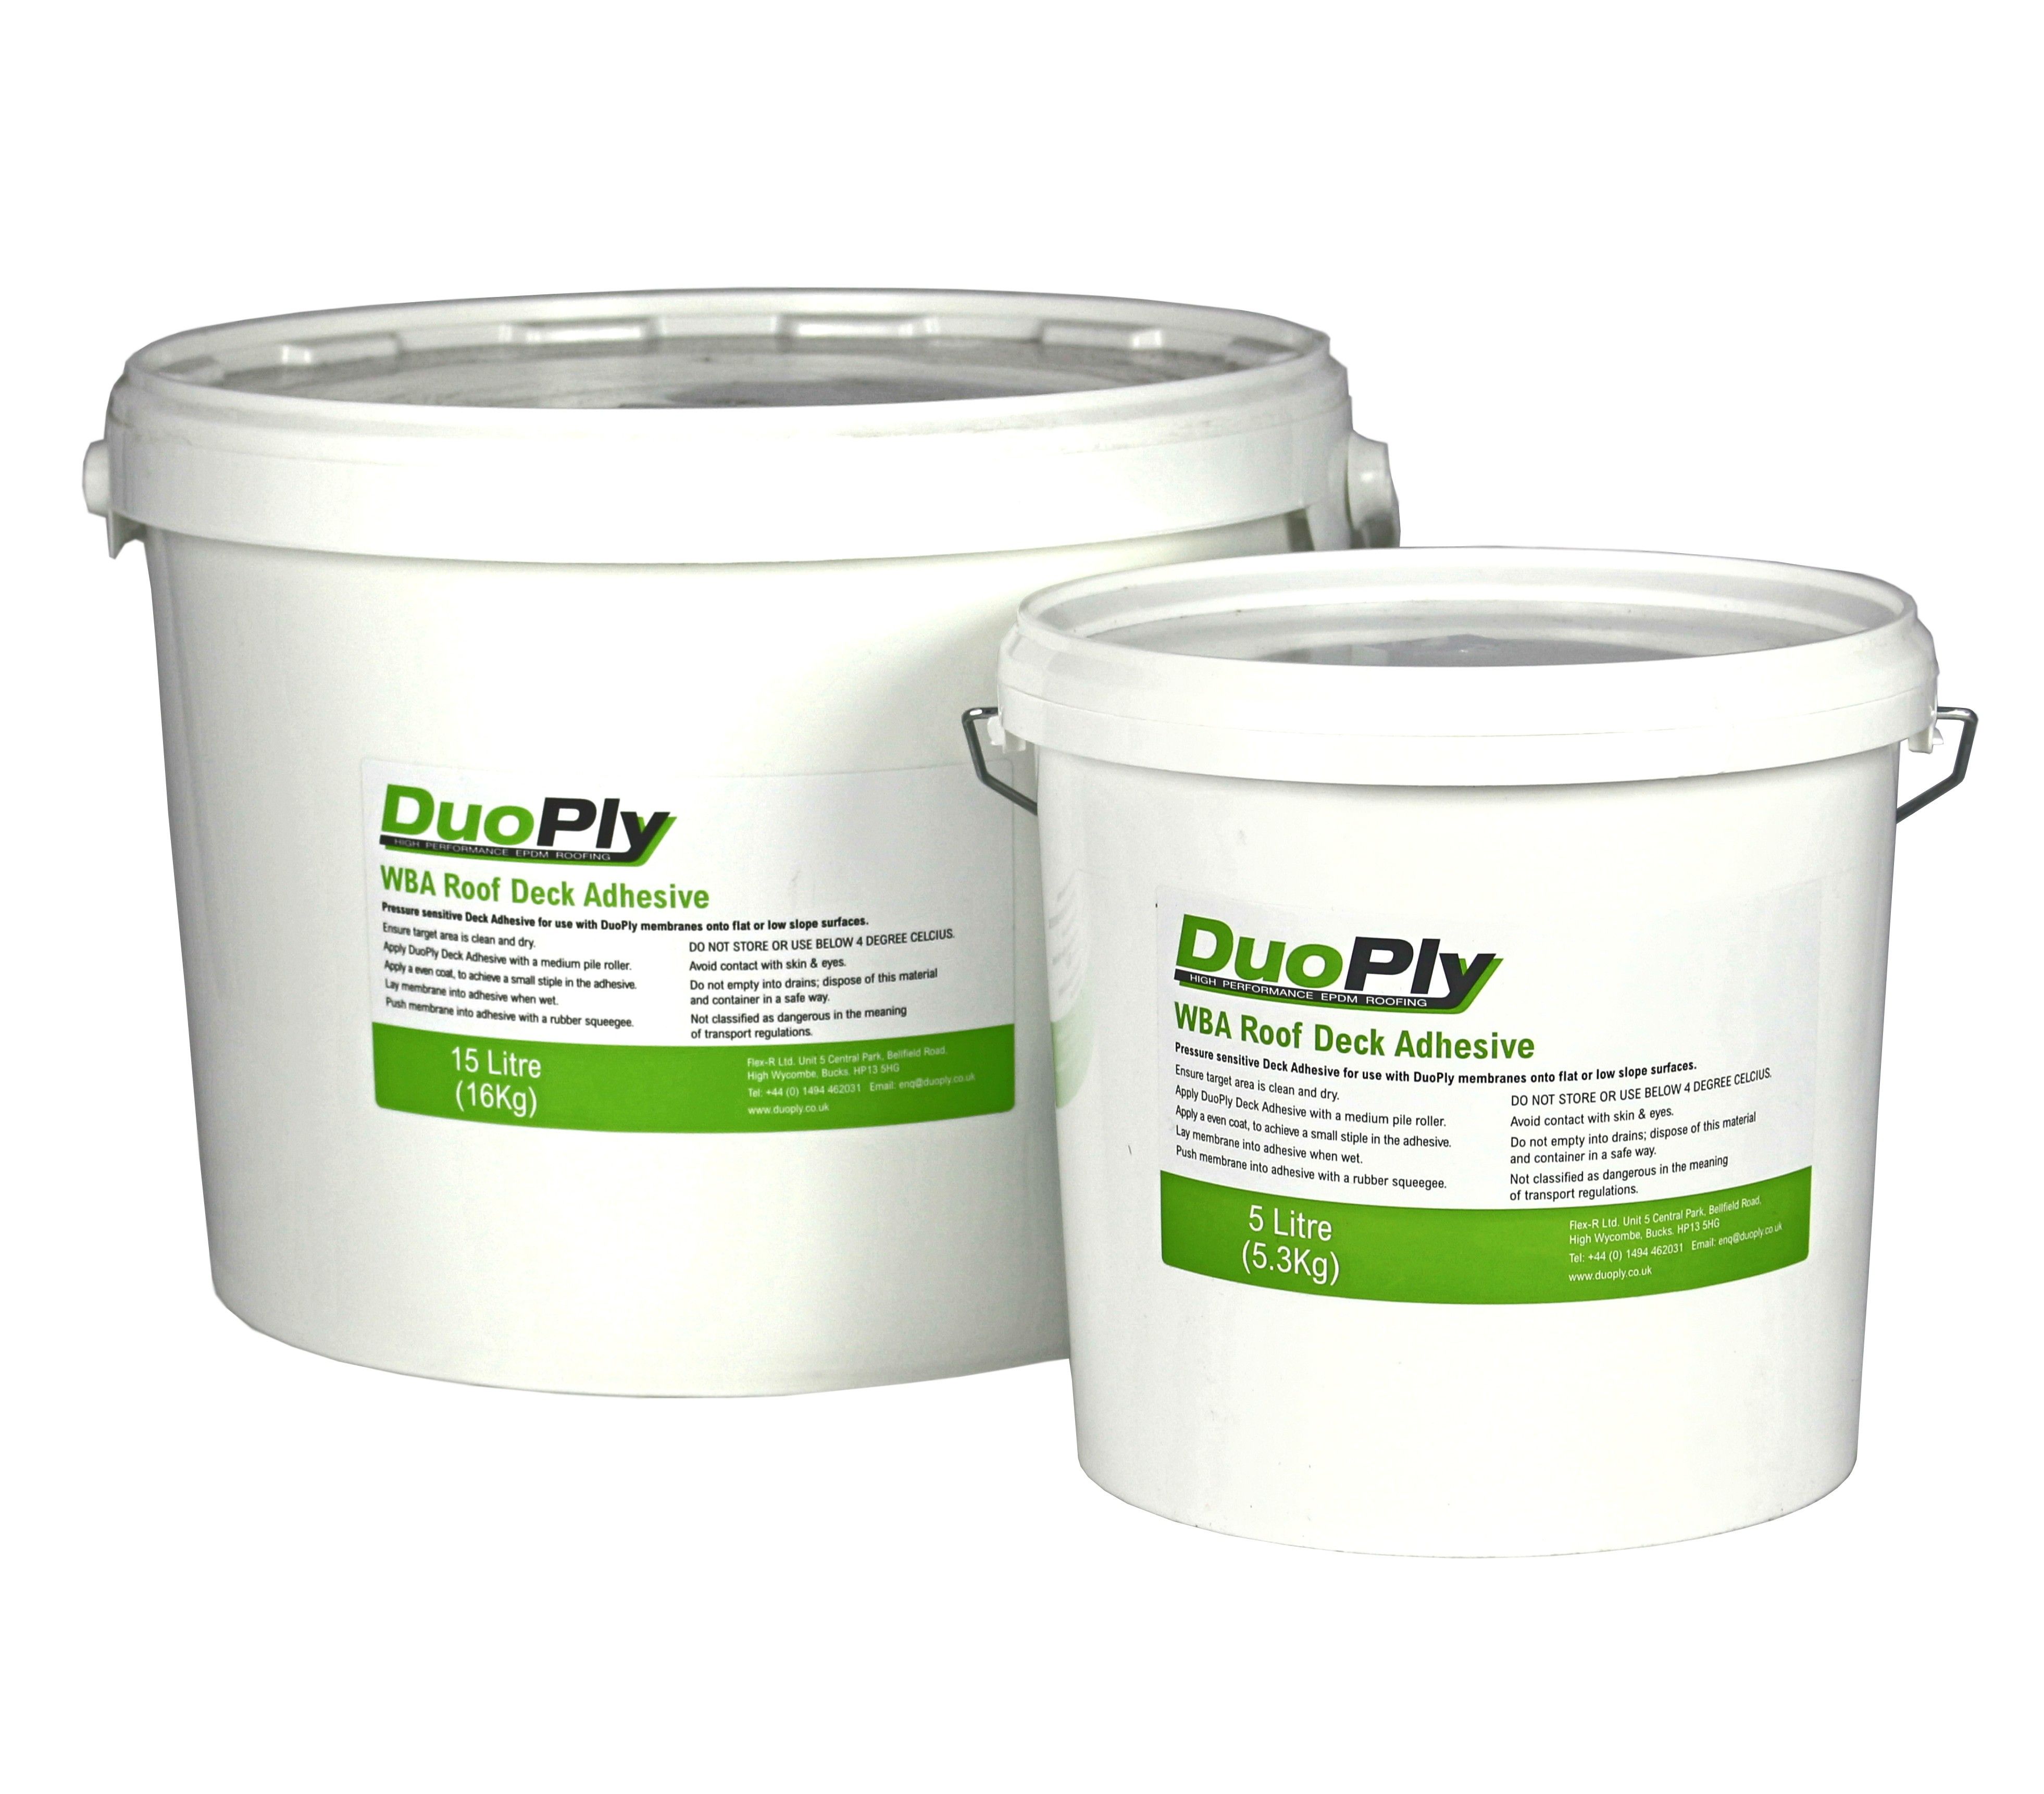 Duoply - Water Based Deck Adhesive (15 Litres - 50 to 60 sqm)